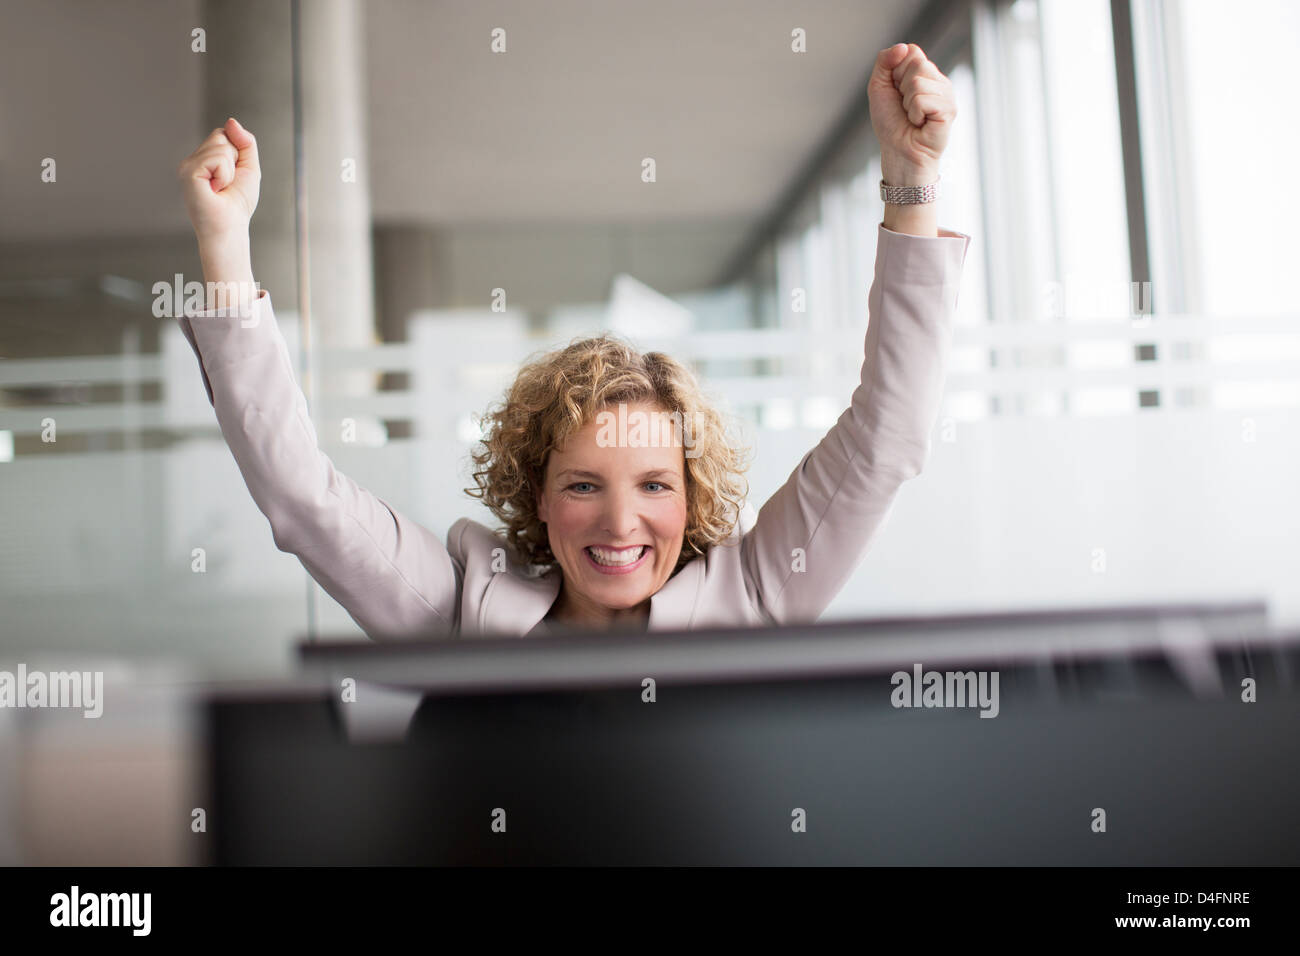 Businesswoman cheering in office Banque D'Images